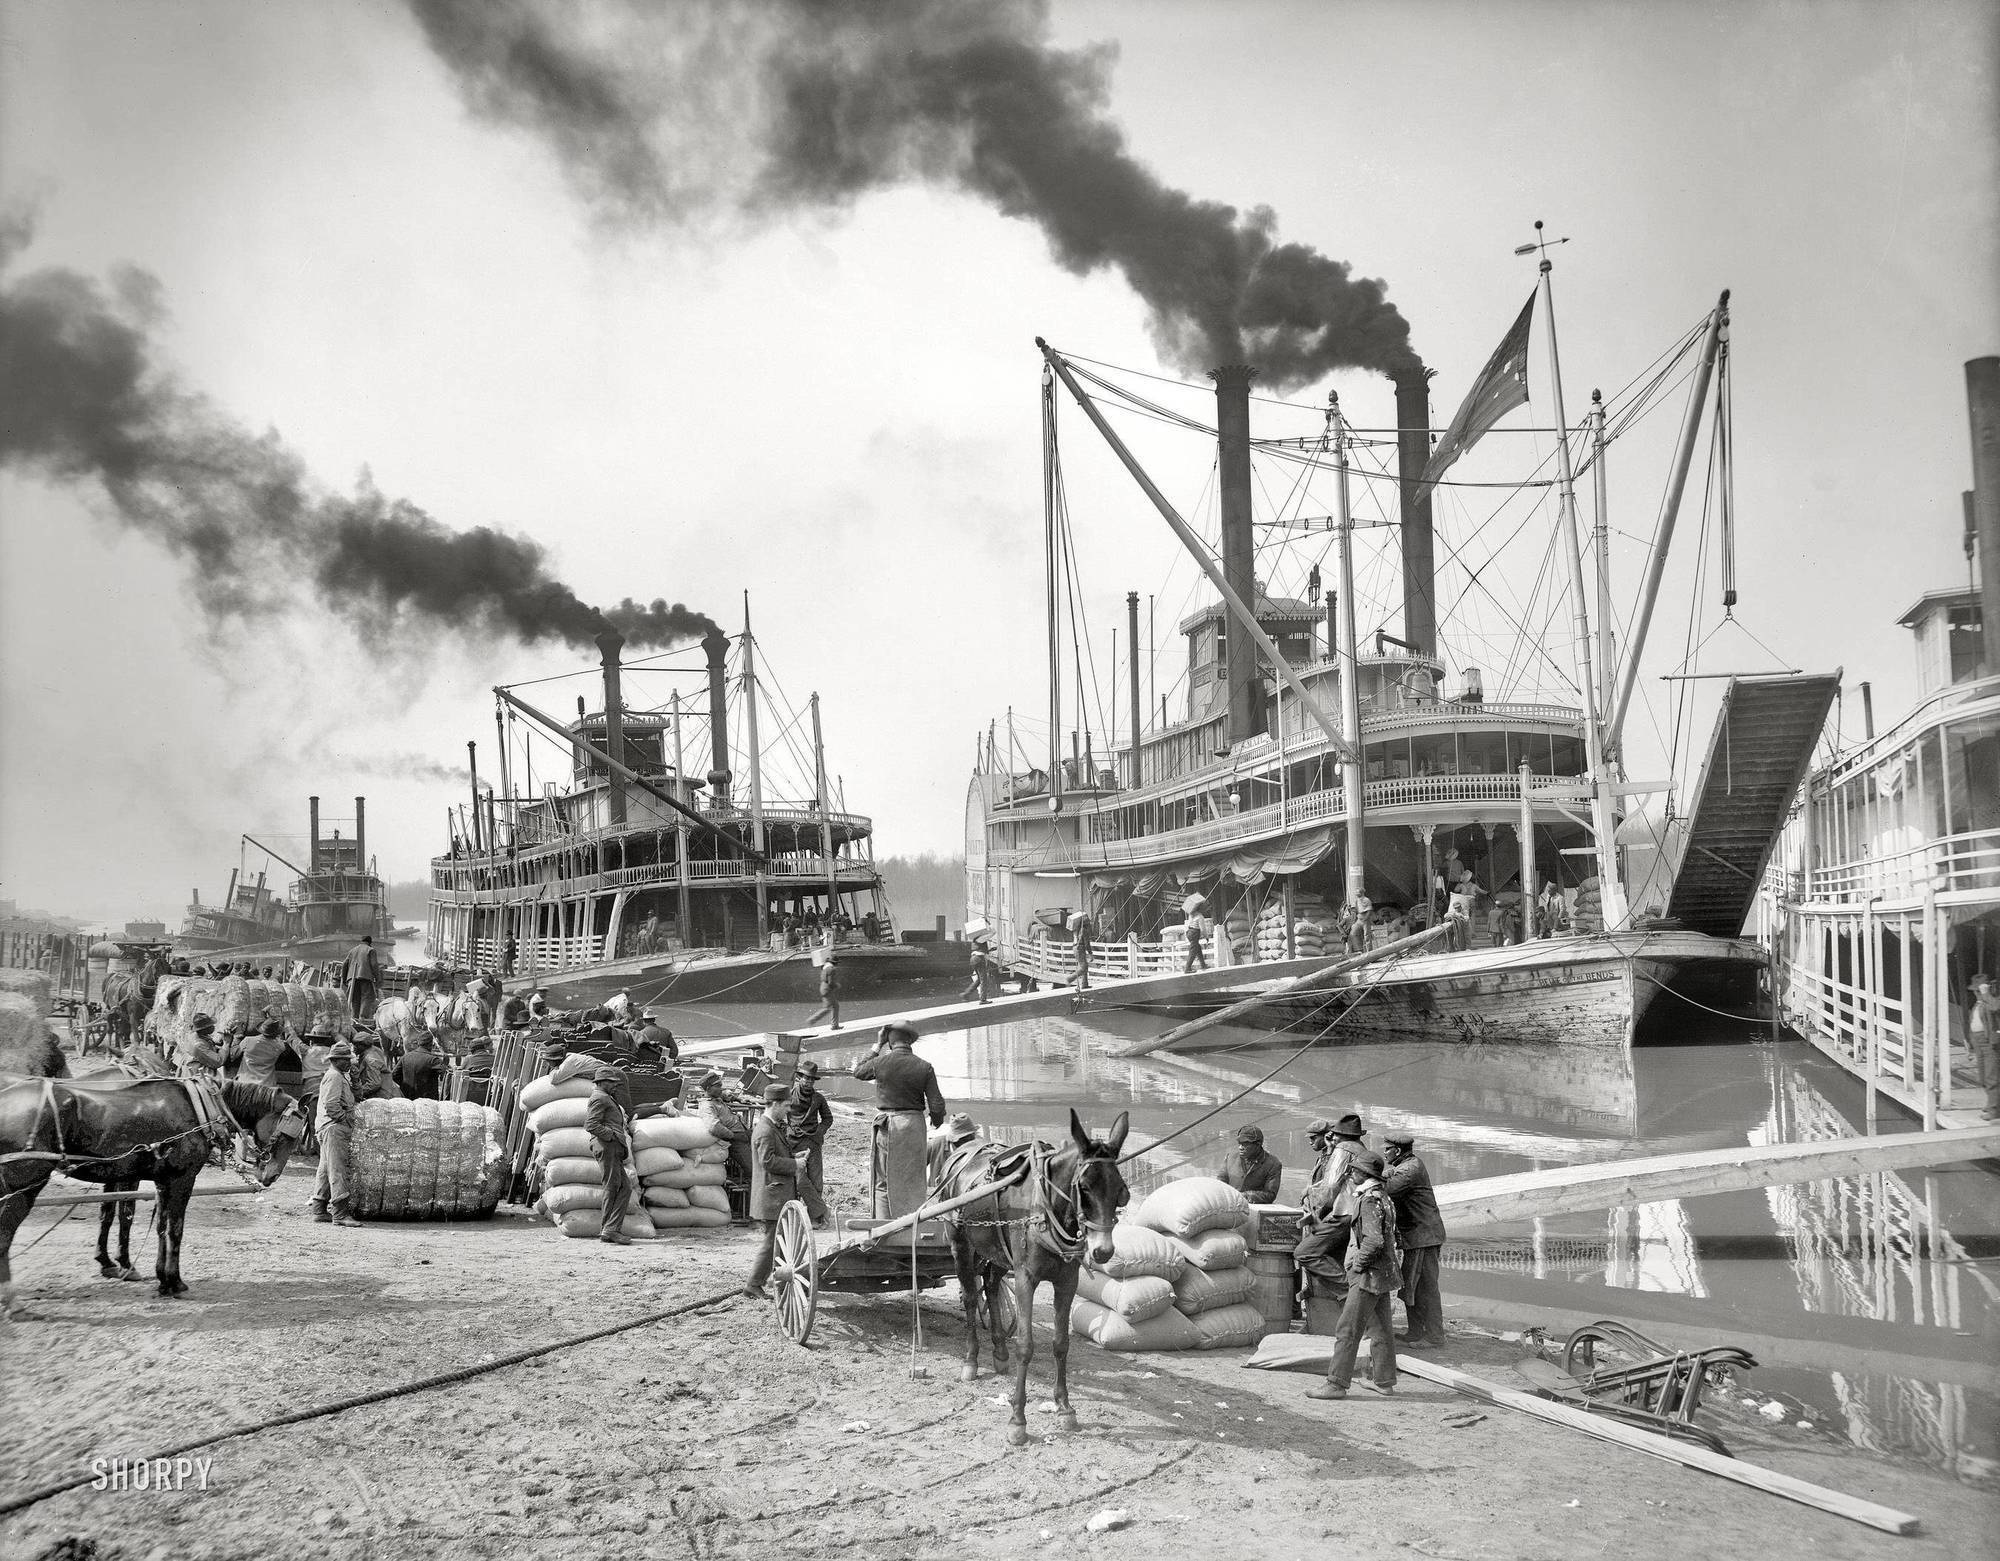 Steamboats chugging along on the Mississippi River in 1907.